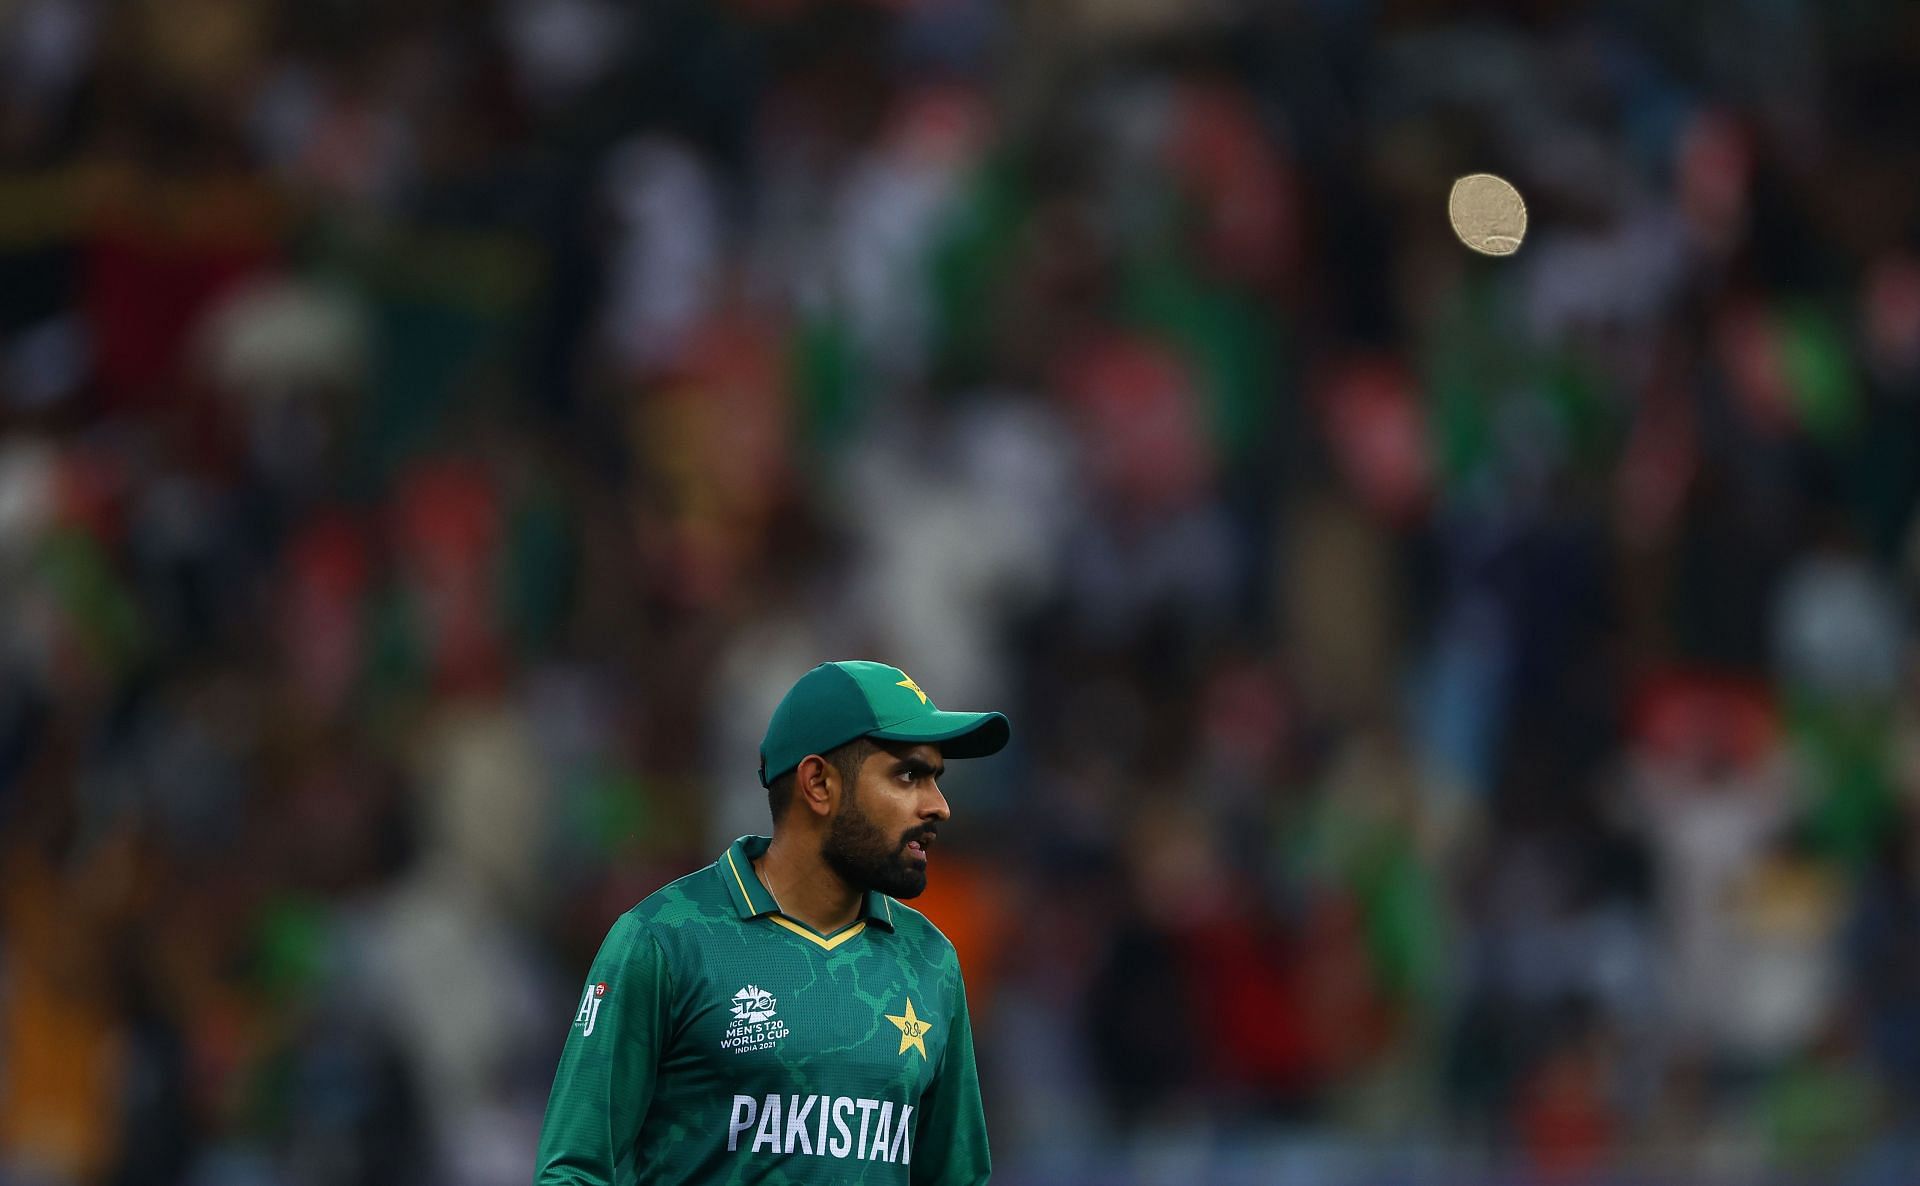 Babar Azam is yet to score a fifty in 2022 Asia Cup. (Credits: Getty)